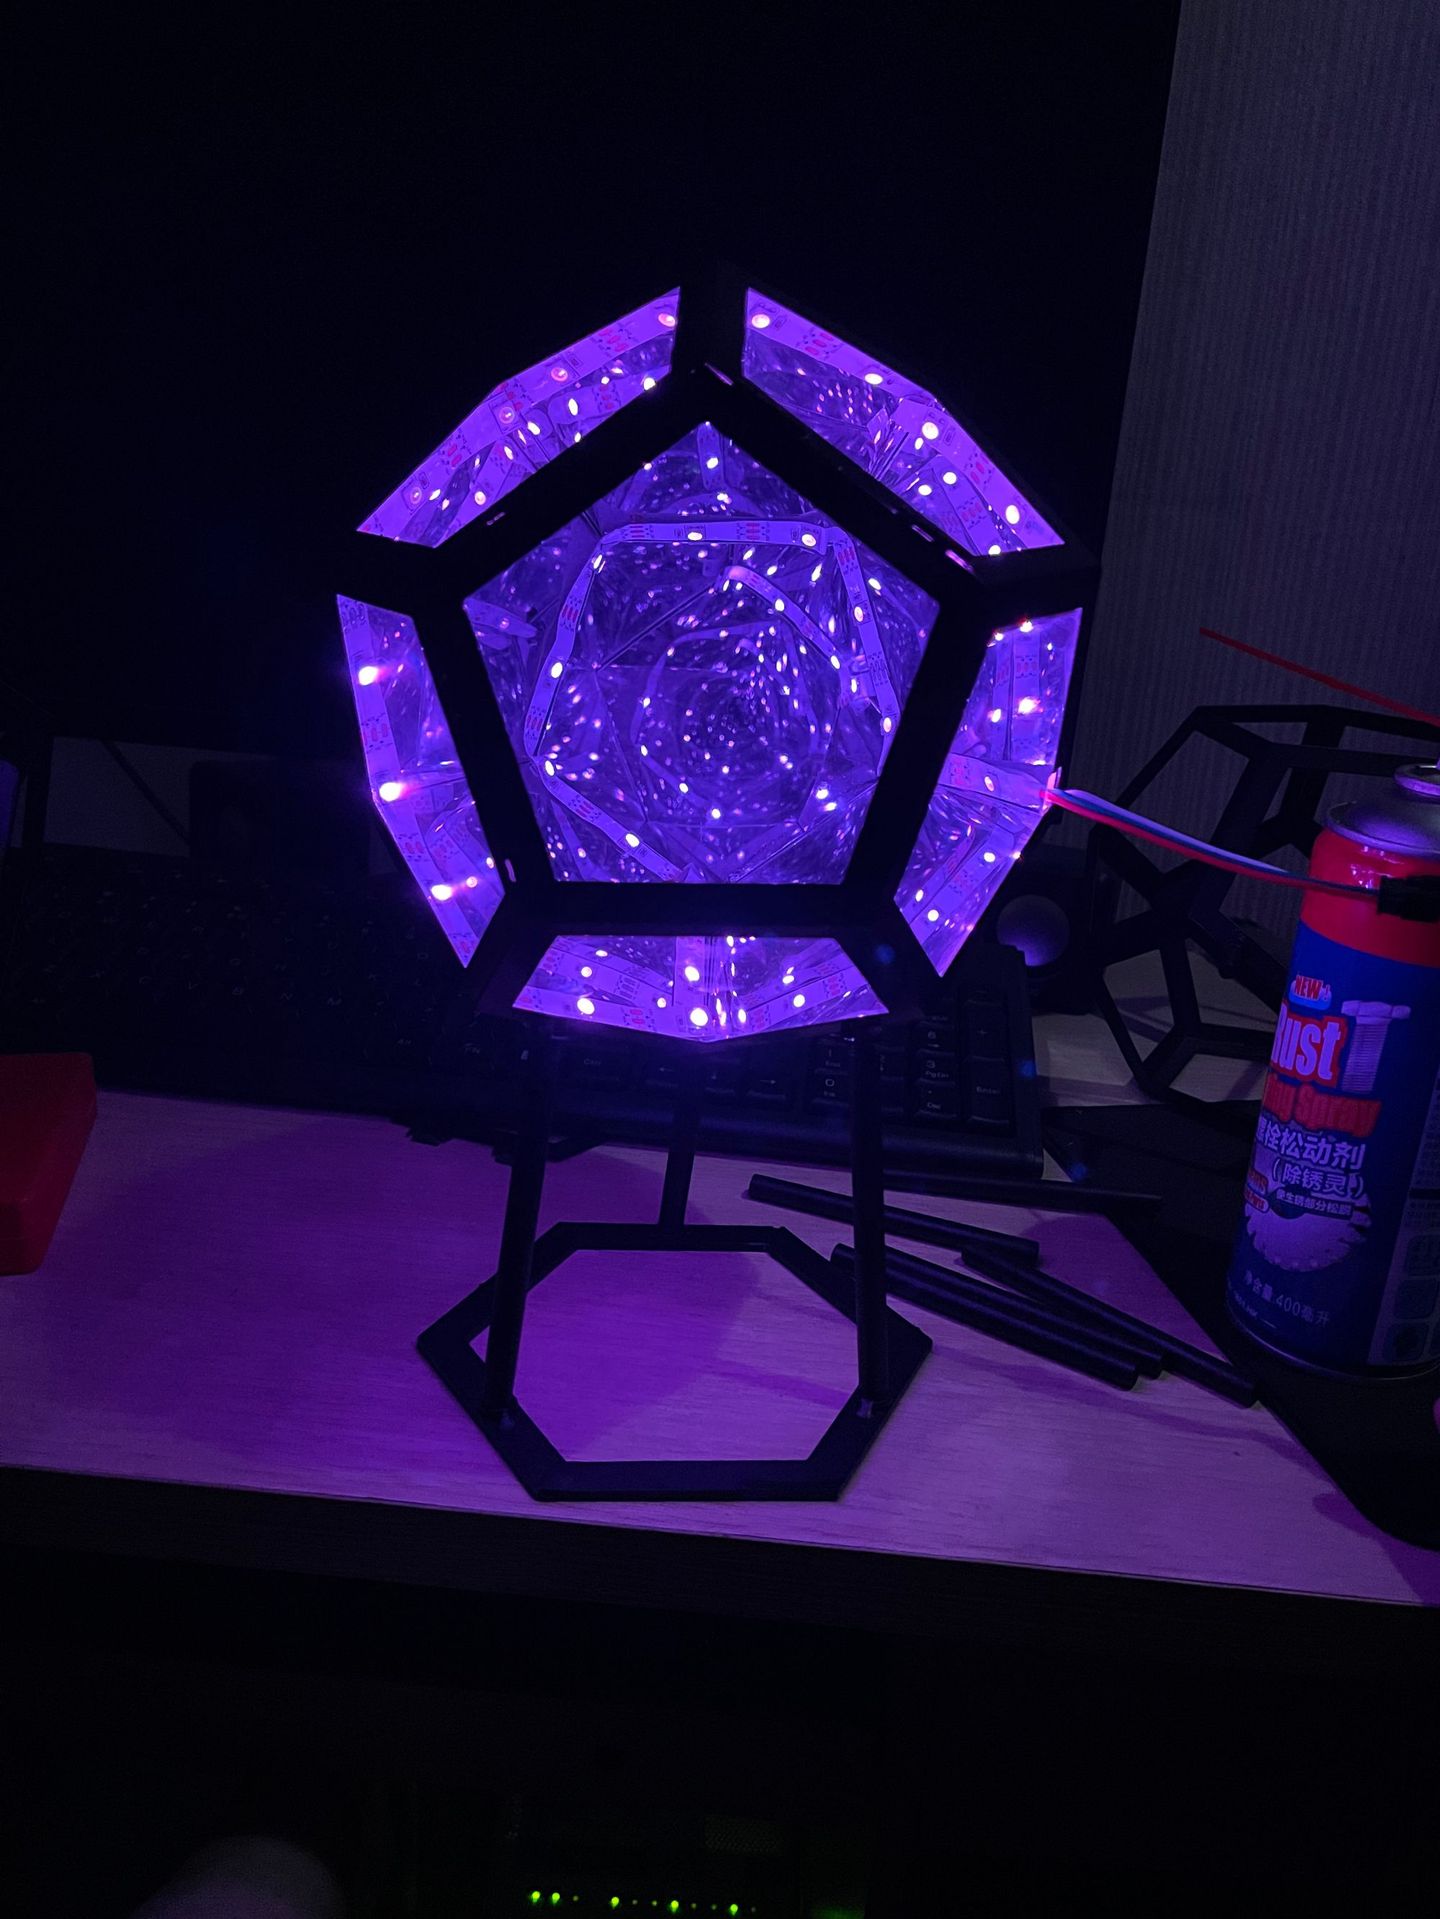 LED-Night-Light-Infinite-Dodecahedron-Color-Art-Light-Decor-Novelty-Christmas-Gift-Cool-Technology-D-1892830-5